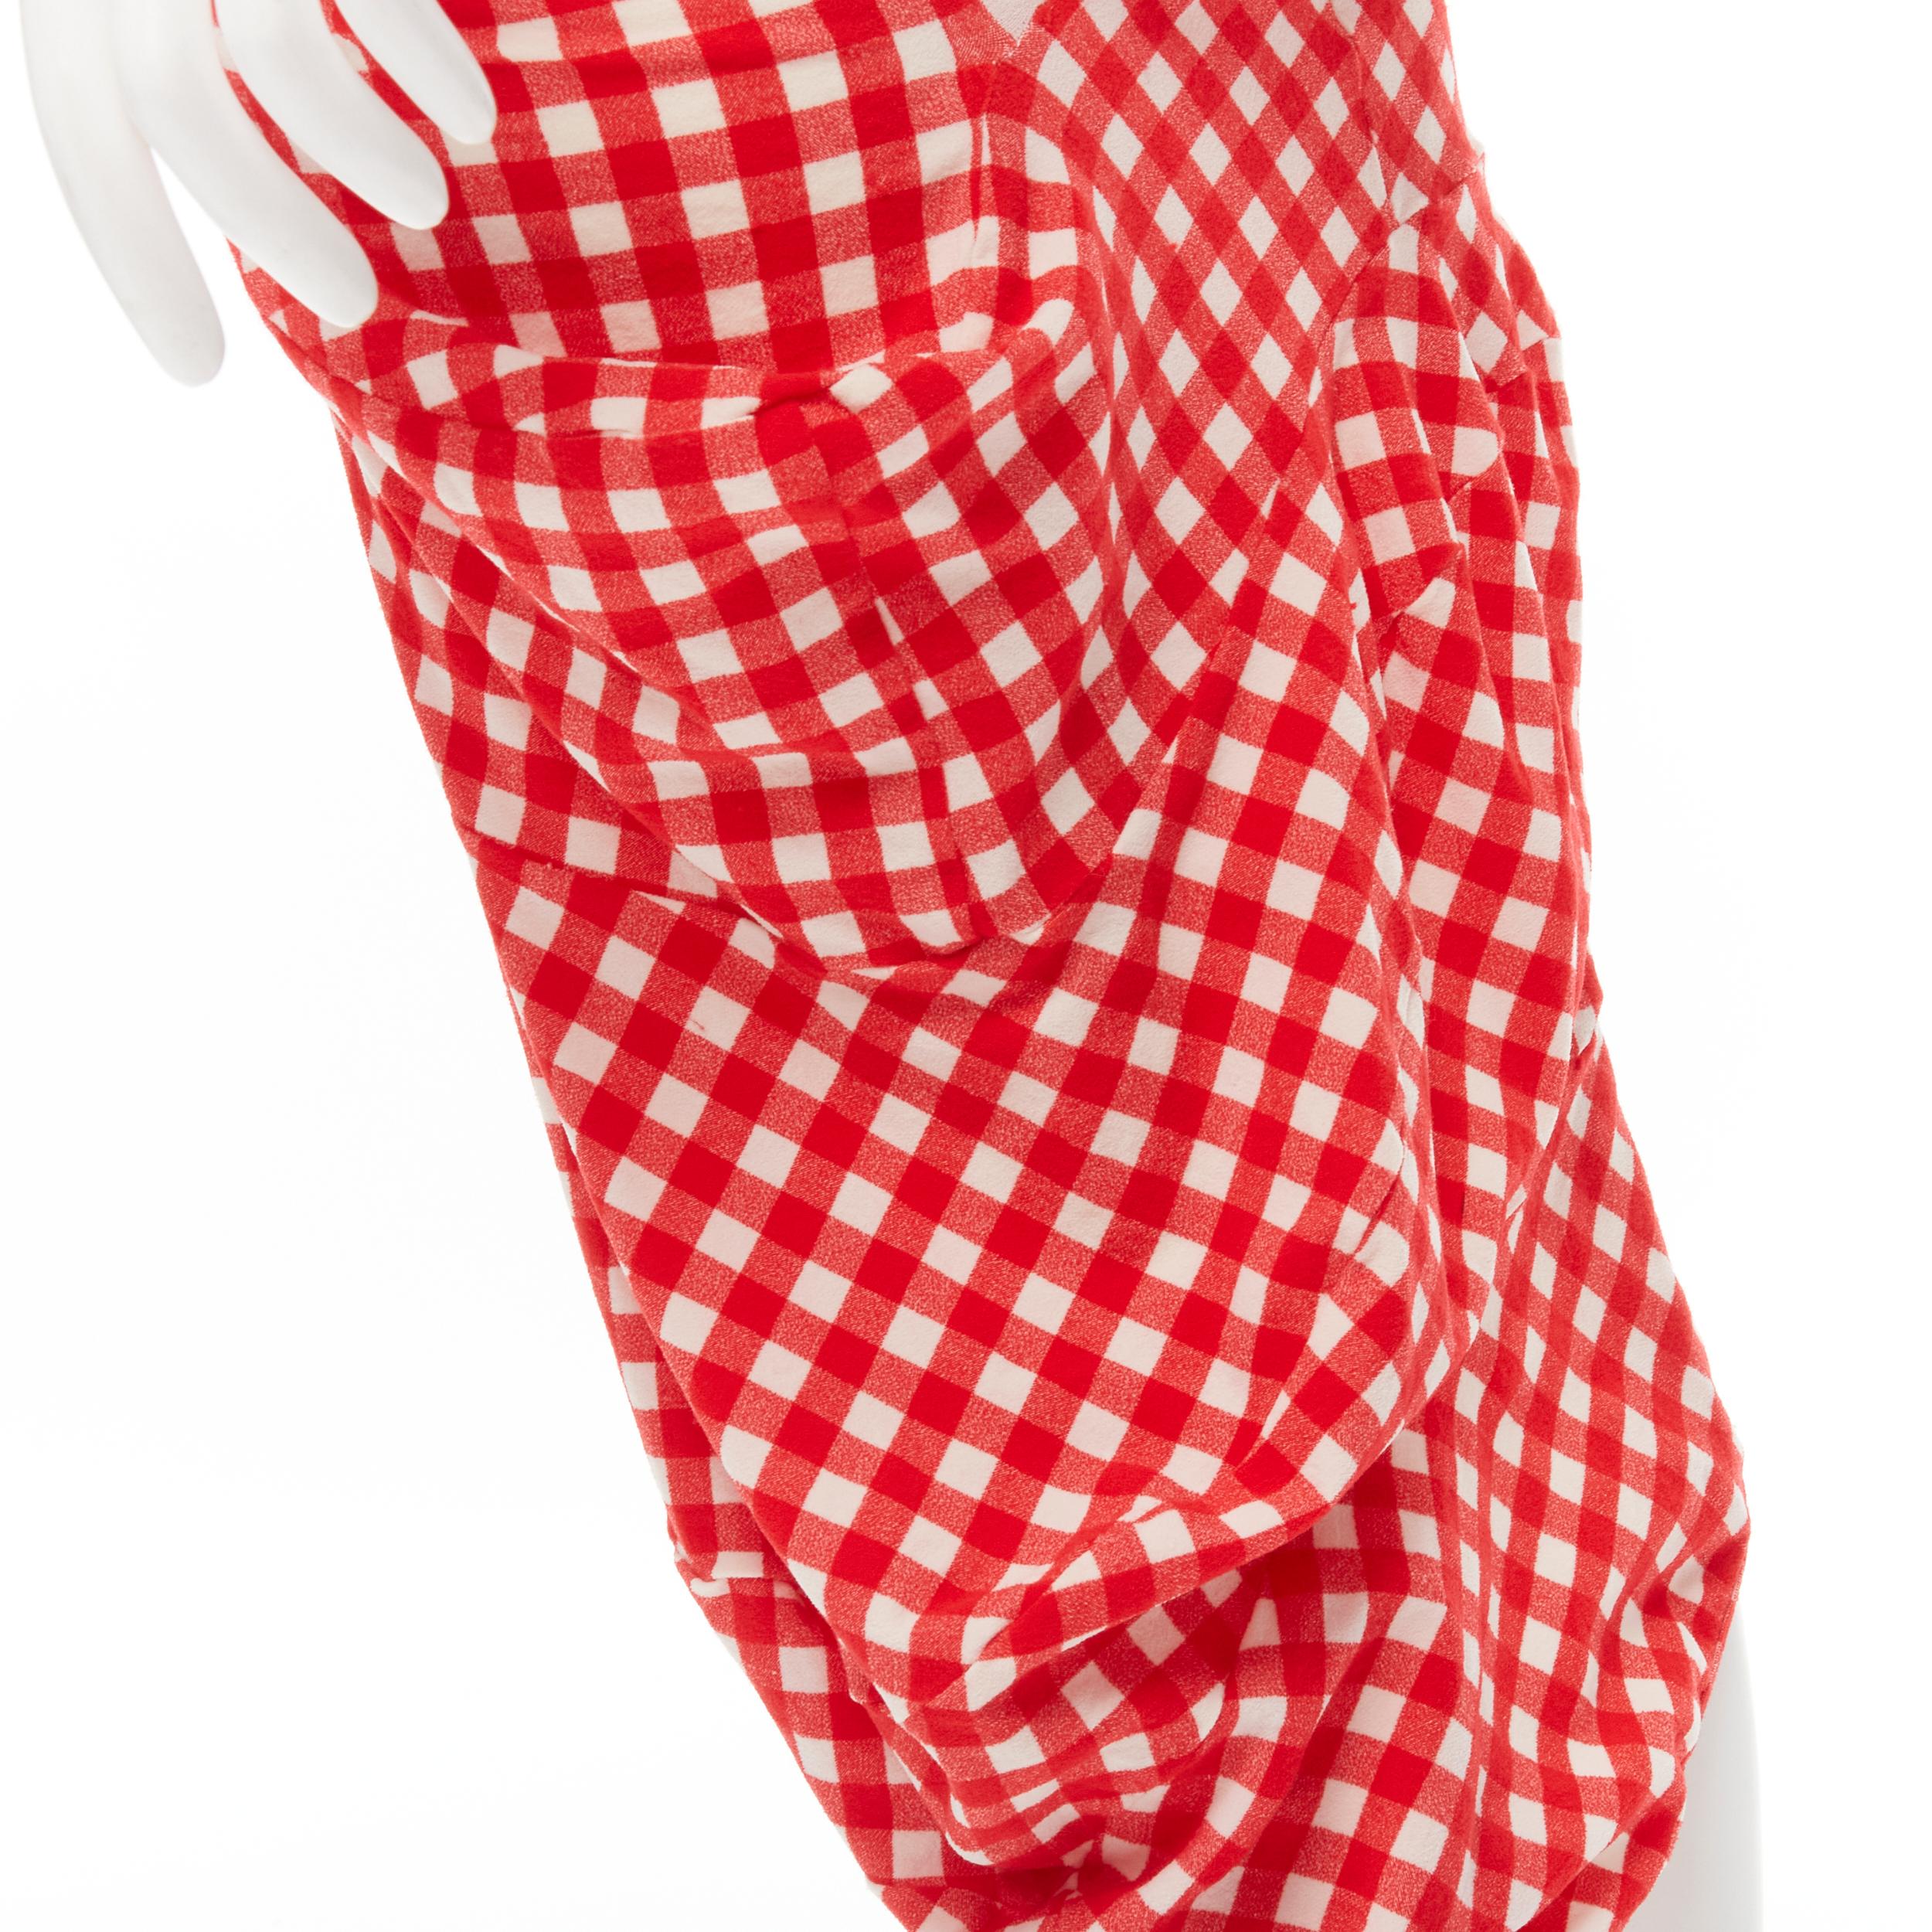 COMME DES GARCONS 1997 Vintage Lumps and Bumps red sheer top irregular skirt S 
Reference: CRTI/A00721 
Brand: Comme Des Garcons 
Designer: Rei Kawakubo 
Material: Viscose 
Color: Red 
Pattern: Gingham 
Extra Detail: Red sheer top with irregular